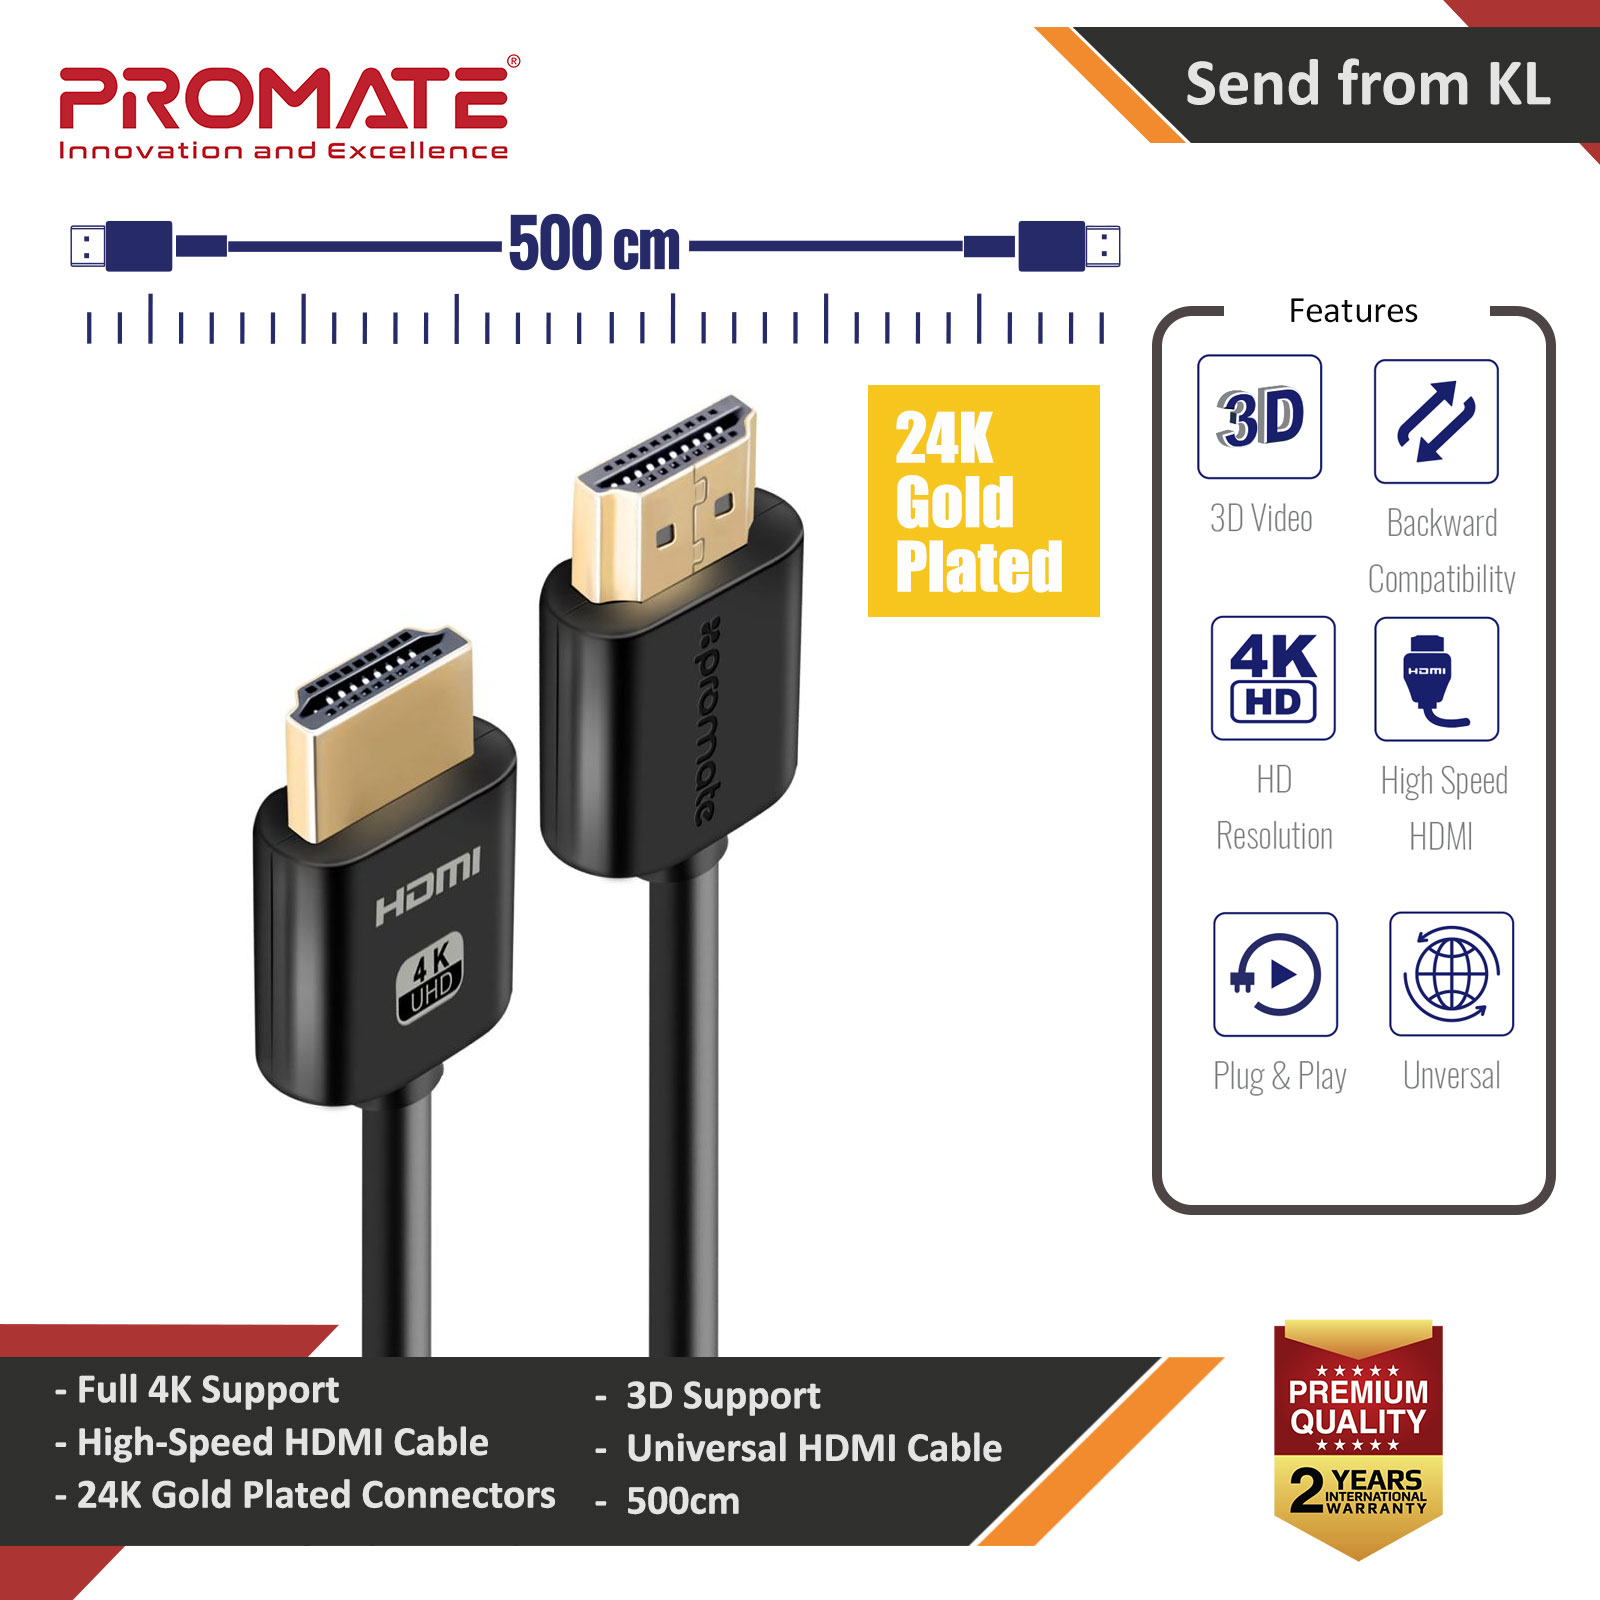 Picture of Promate 4K HDMI Cable High-Speed 5 Meter HDMI Cable with 24K Gold Plated Connector and Ethernet 3D Video Support for HDTV Projectors Computers LED TV and Game consoles 500cm ProLink4K2-500 iPhone Cases - iPhone 14 Pro Max , iPhone 13 Pro Max, Galaxy S23 Ultra, Google Pixel 7 Pro, Galaxy Z Fold 4, Galaxy Z Flip 4 Cases Malaysia,iPhone 12 Pro Max Cases Malaysia, iPad Air ,iPad Pro Cases and a wide selection of Accessories in Malaysia, Sabah, Sarawak and Singapore. 